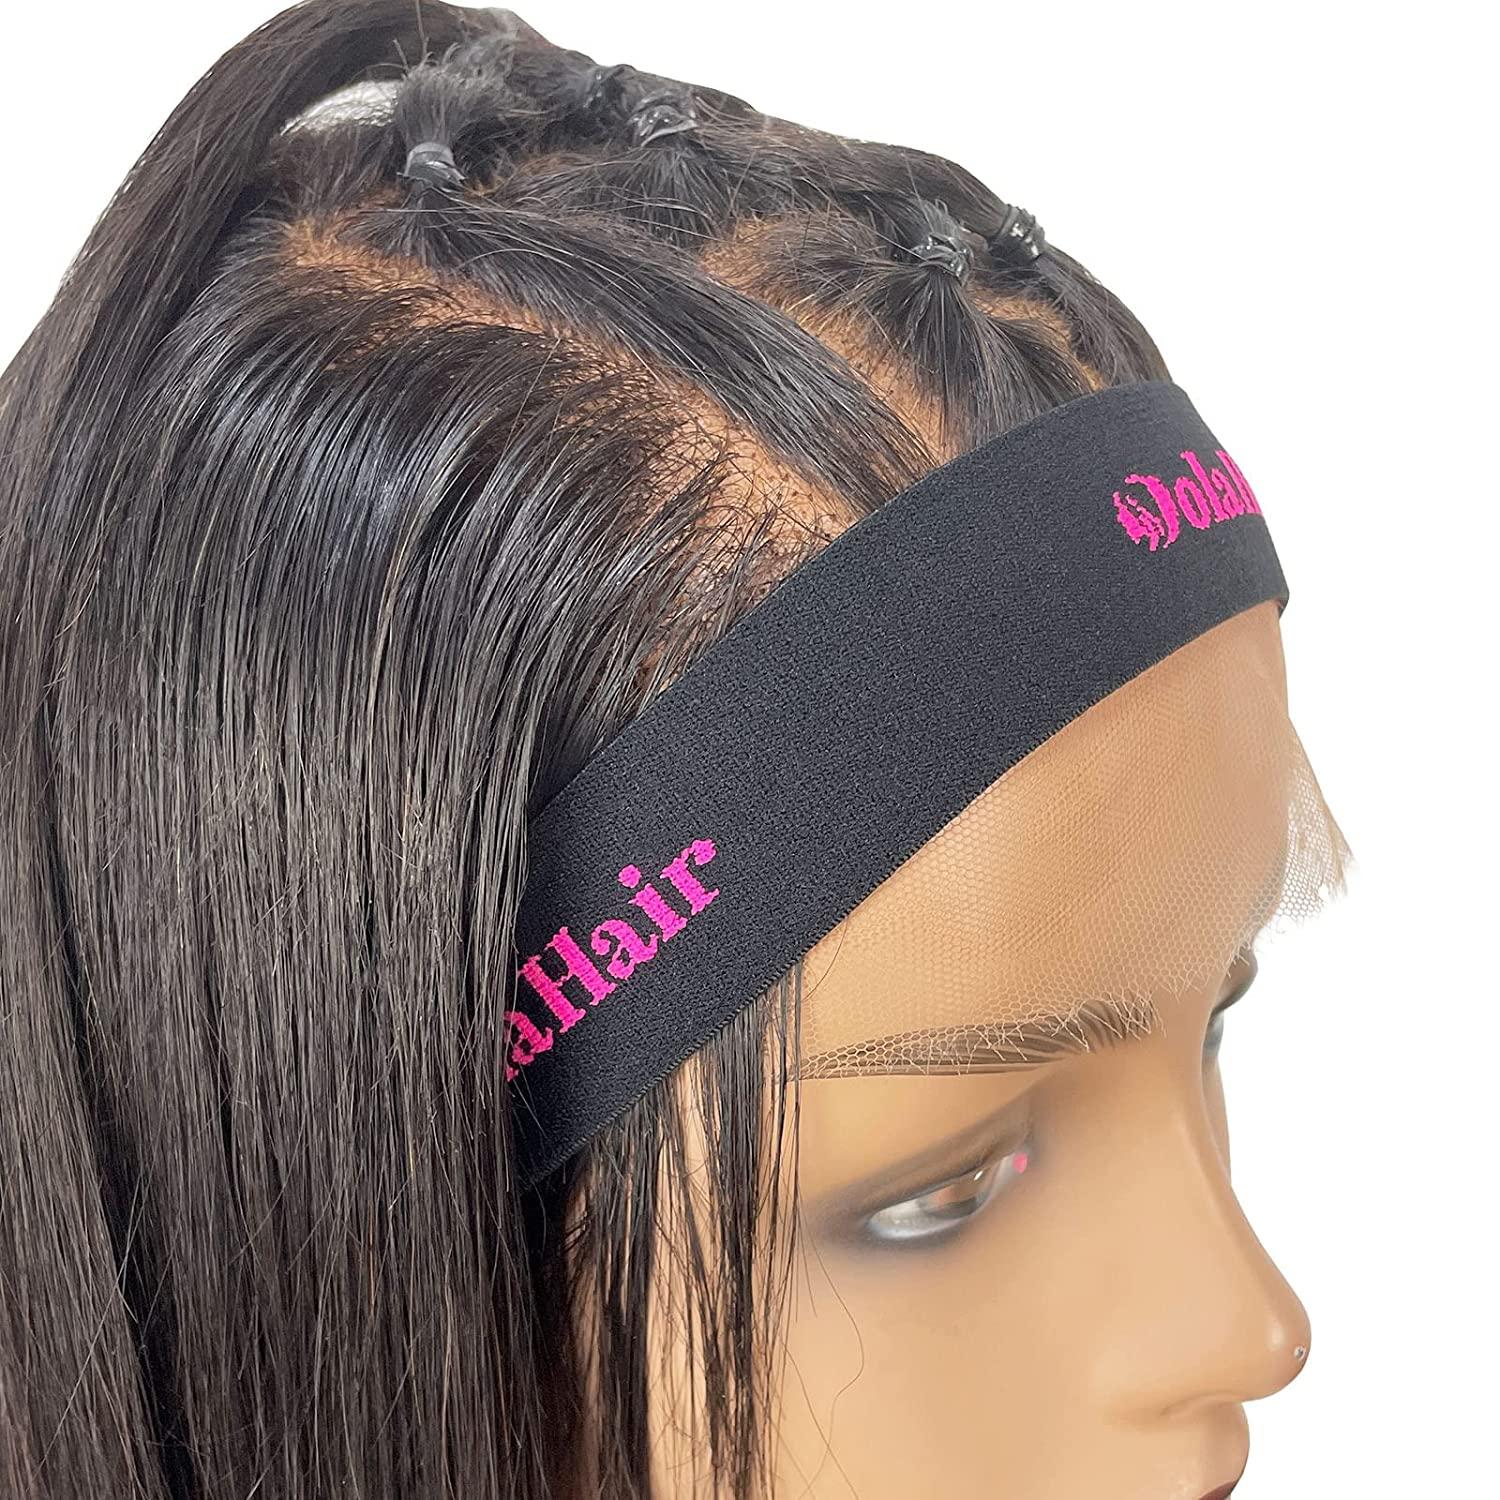 Wig Bands For Keeping Wigs In Place Lay The Lace Wig Headband Lace Band Wig  Accessories Melt Band For Lace Wigs Edge Laying Band - AliExpress